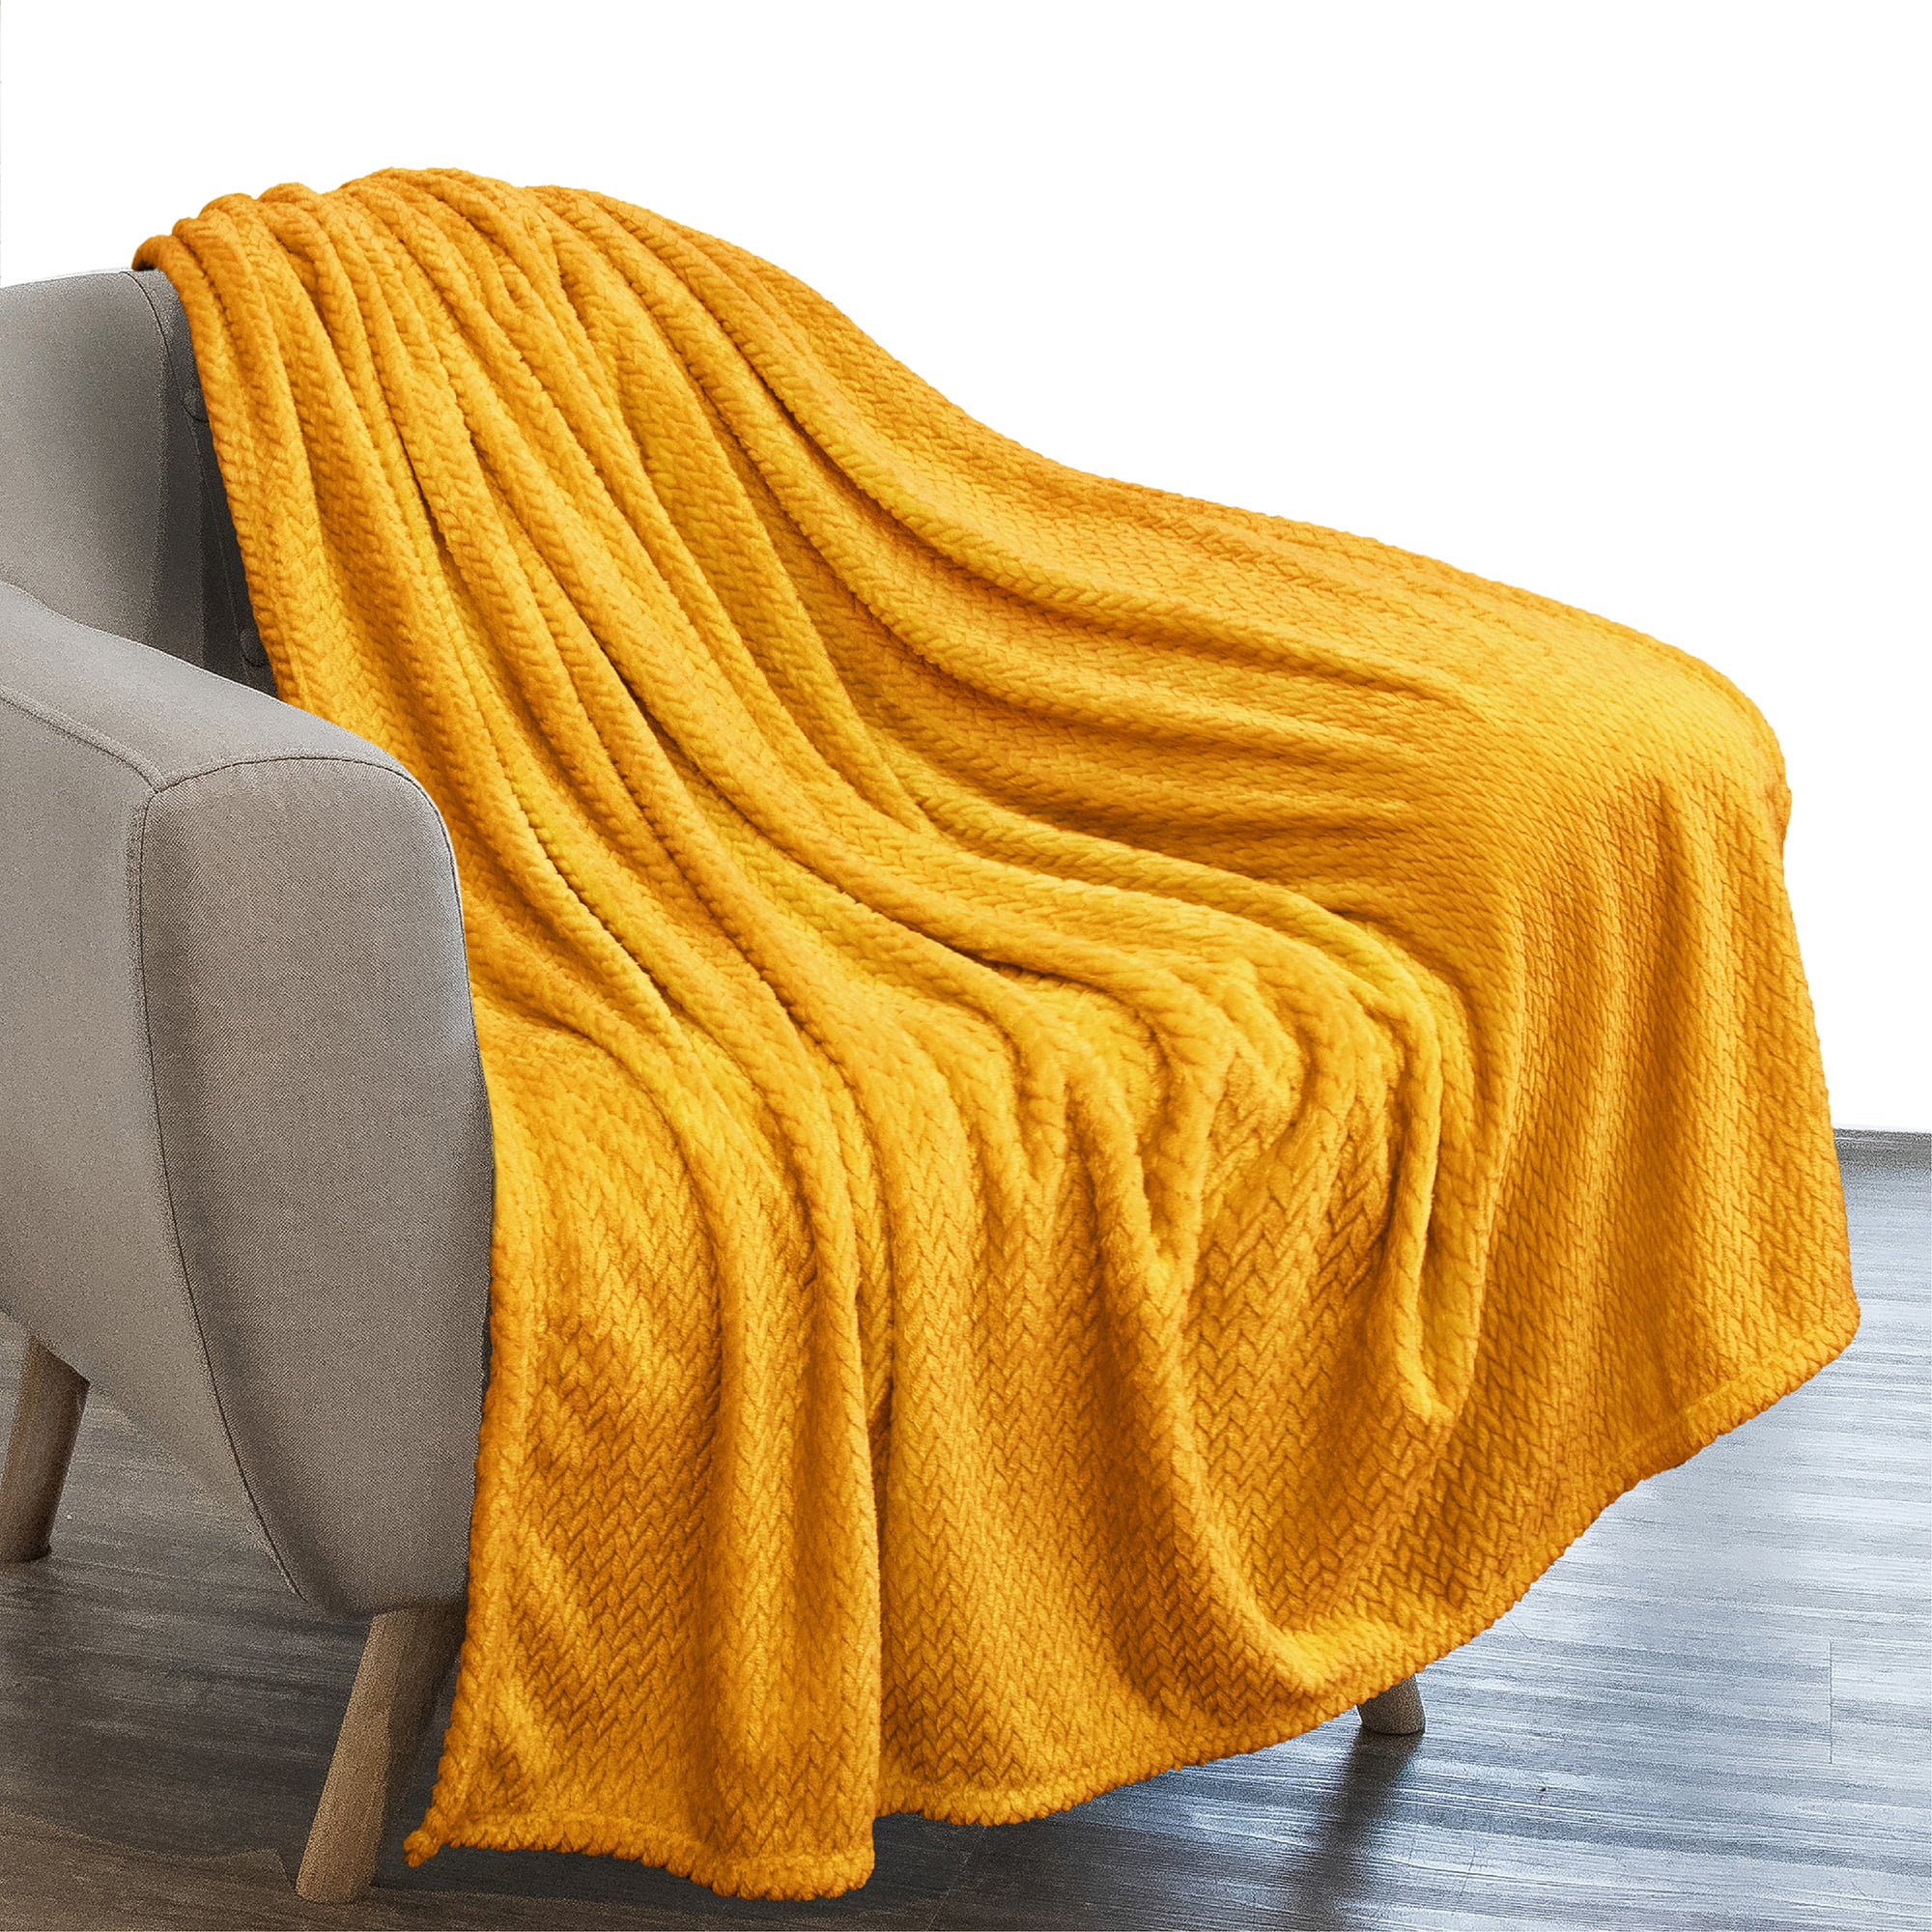 Sofa Travel Bed Warm Cozy Lightweight Microfiber Cozy Flannel Throw Blankets for Couch Camping （Backyard Winter Birds Star Yellow Pearl） 